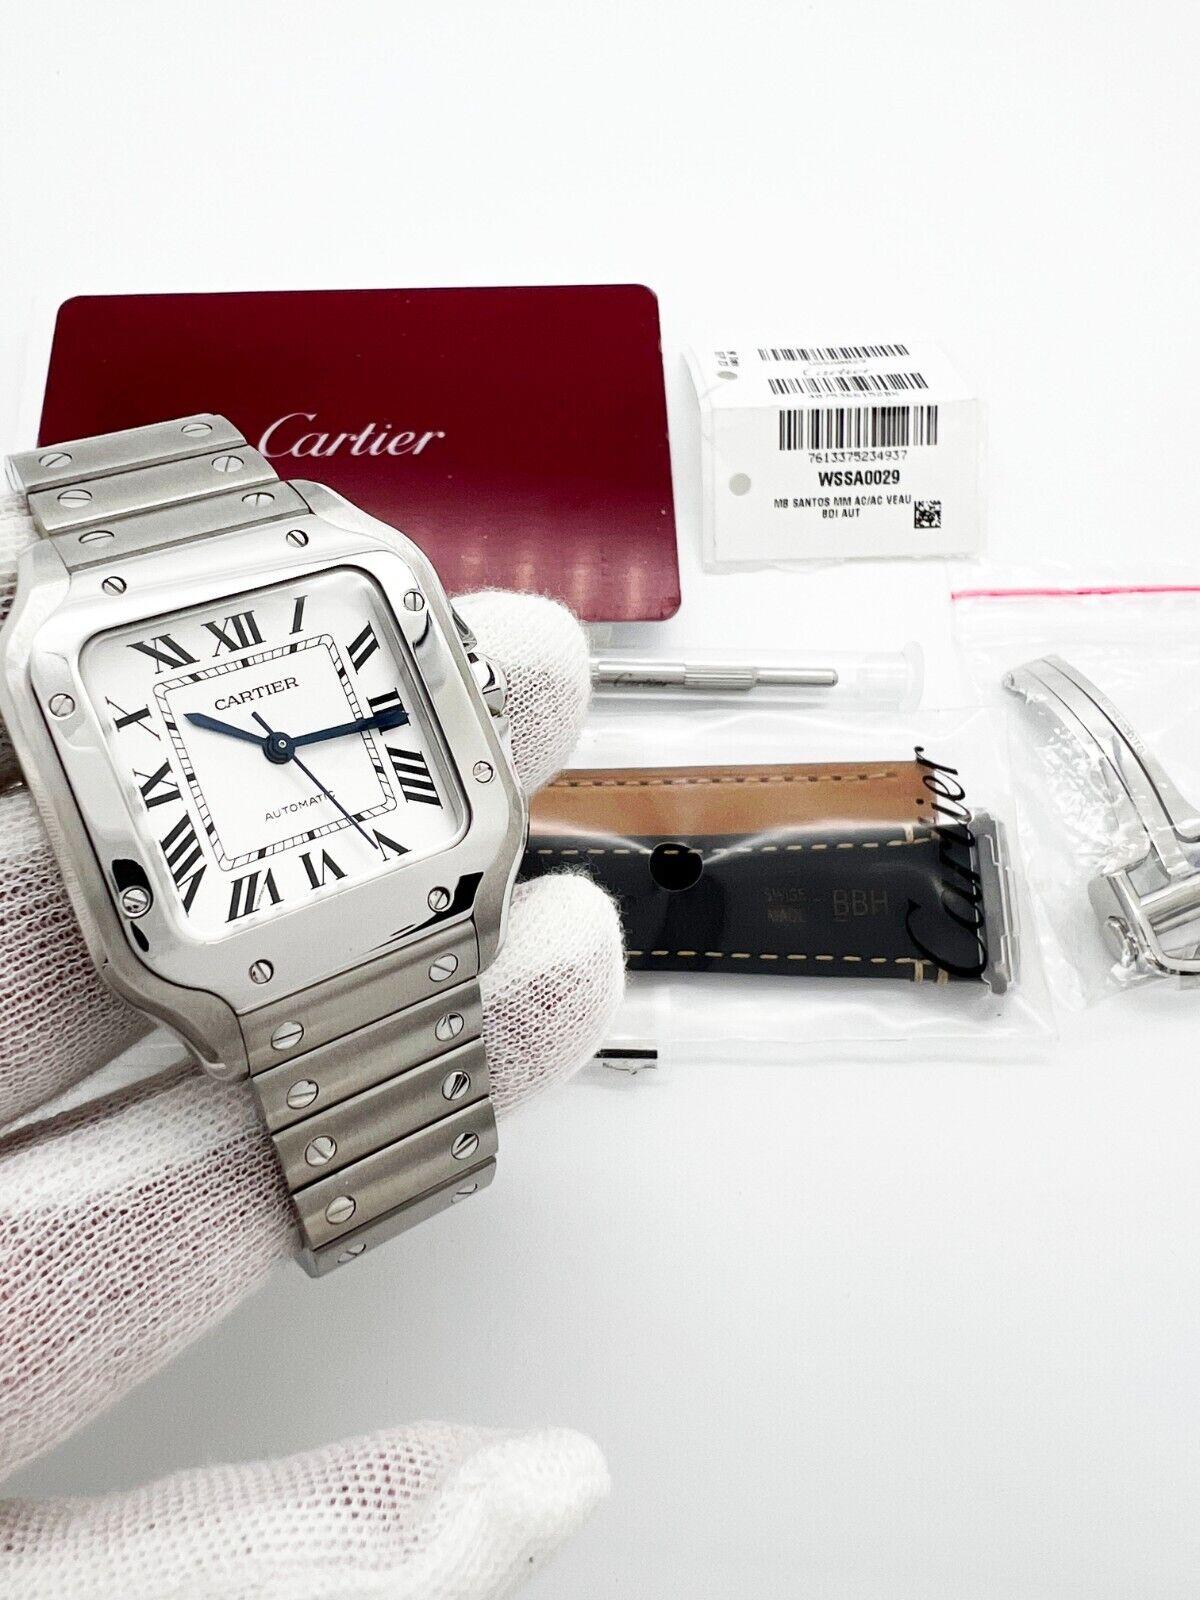 Style Number: WSSA0029 / Ref 4075

Year: 2022
 
Model: Santos - Medium
 
Case Material: Stainless Steel 
 
Band: Stainless Steel
 
Bezel:  Stainless Steel
 
Dial: Silver
 
Face: Sapphire Crystal 
 
Case Size: 35.1 mm x 41.9 mm
 
Includes: 
-Cartier